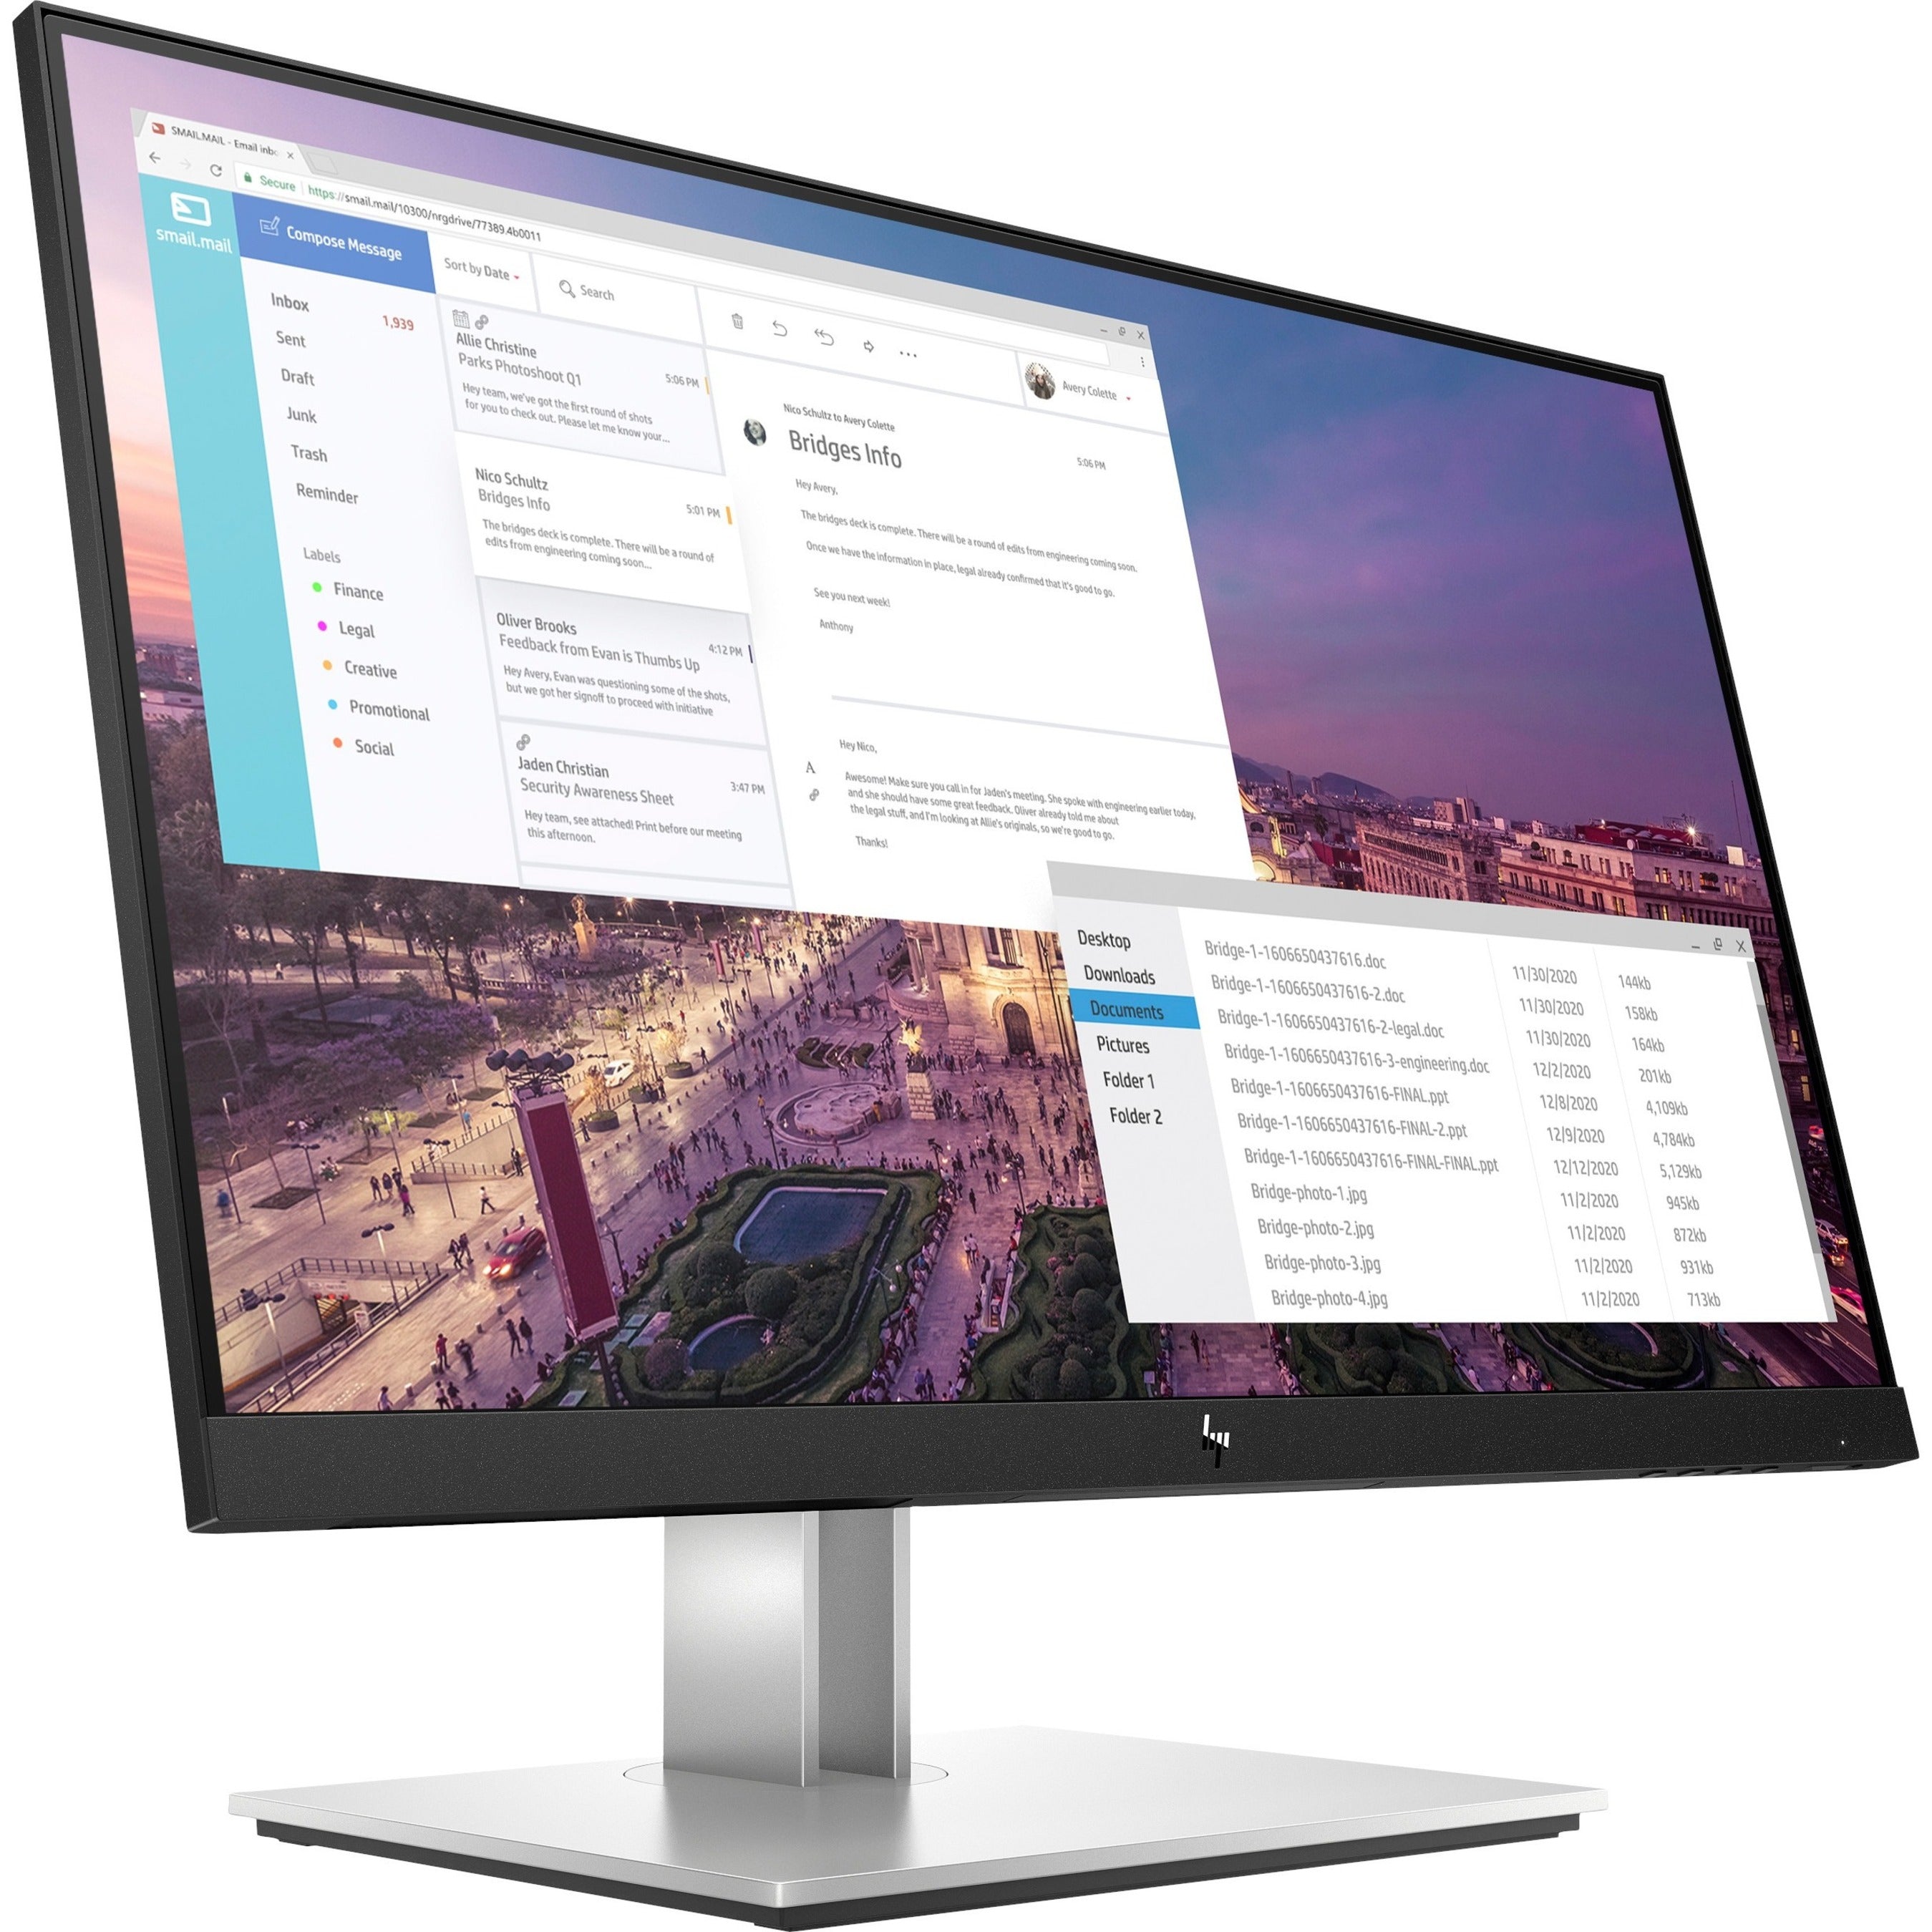 HP E23 G4 23 Full HD LCD Monitor, 250 Nit Brightness, 1920 x 1080 Resolution, 1,000:1 Contrast Ratio [Discontinued]